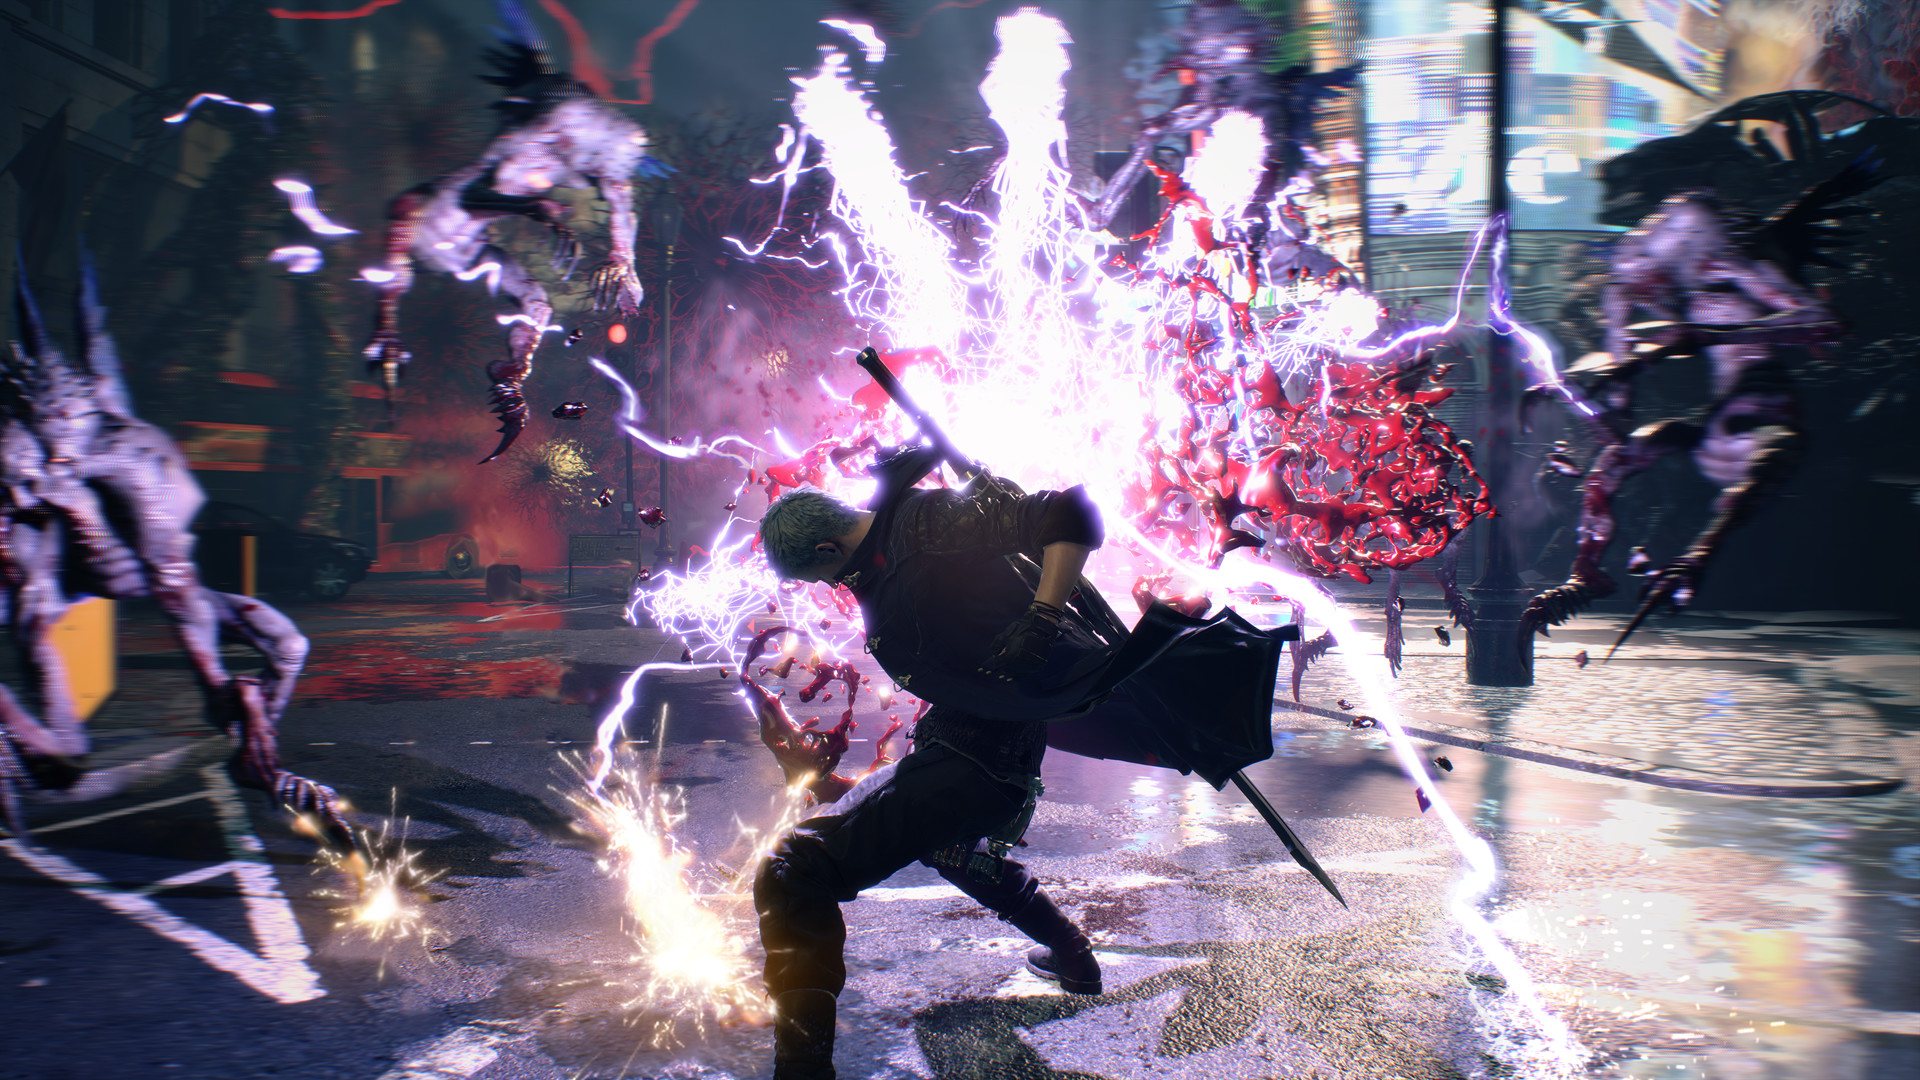 Devil May Cry 5 PlayStation 4 Account pixelpuffin.net Activation Link 13.55 $